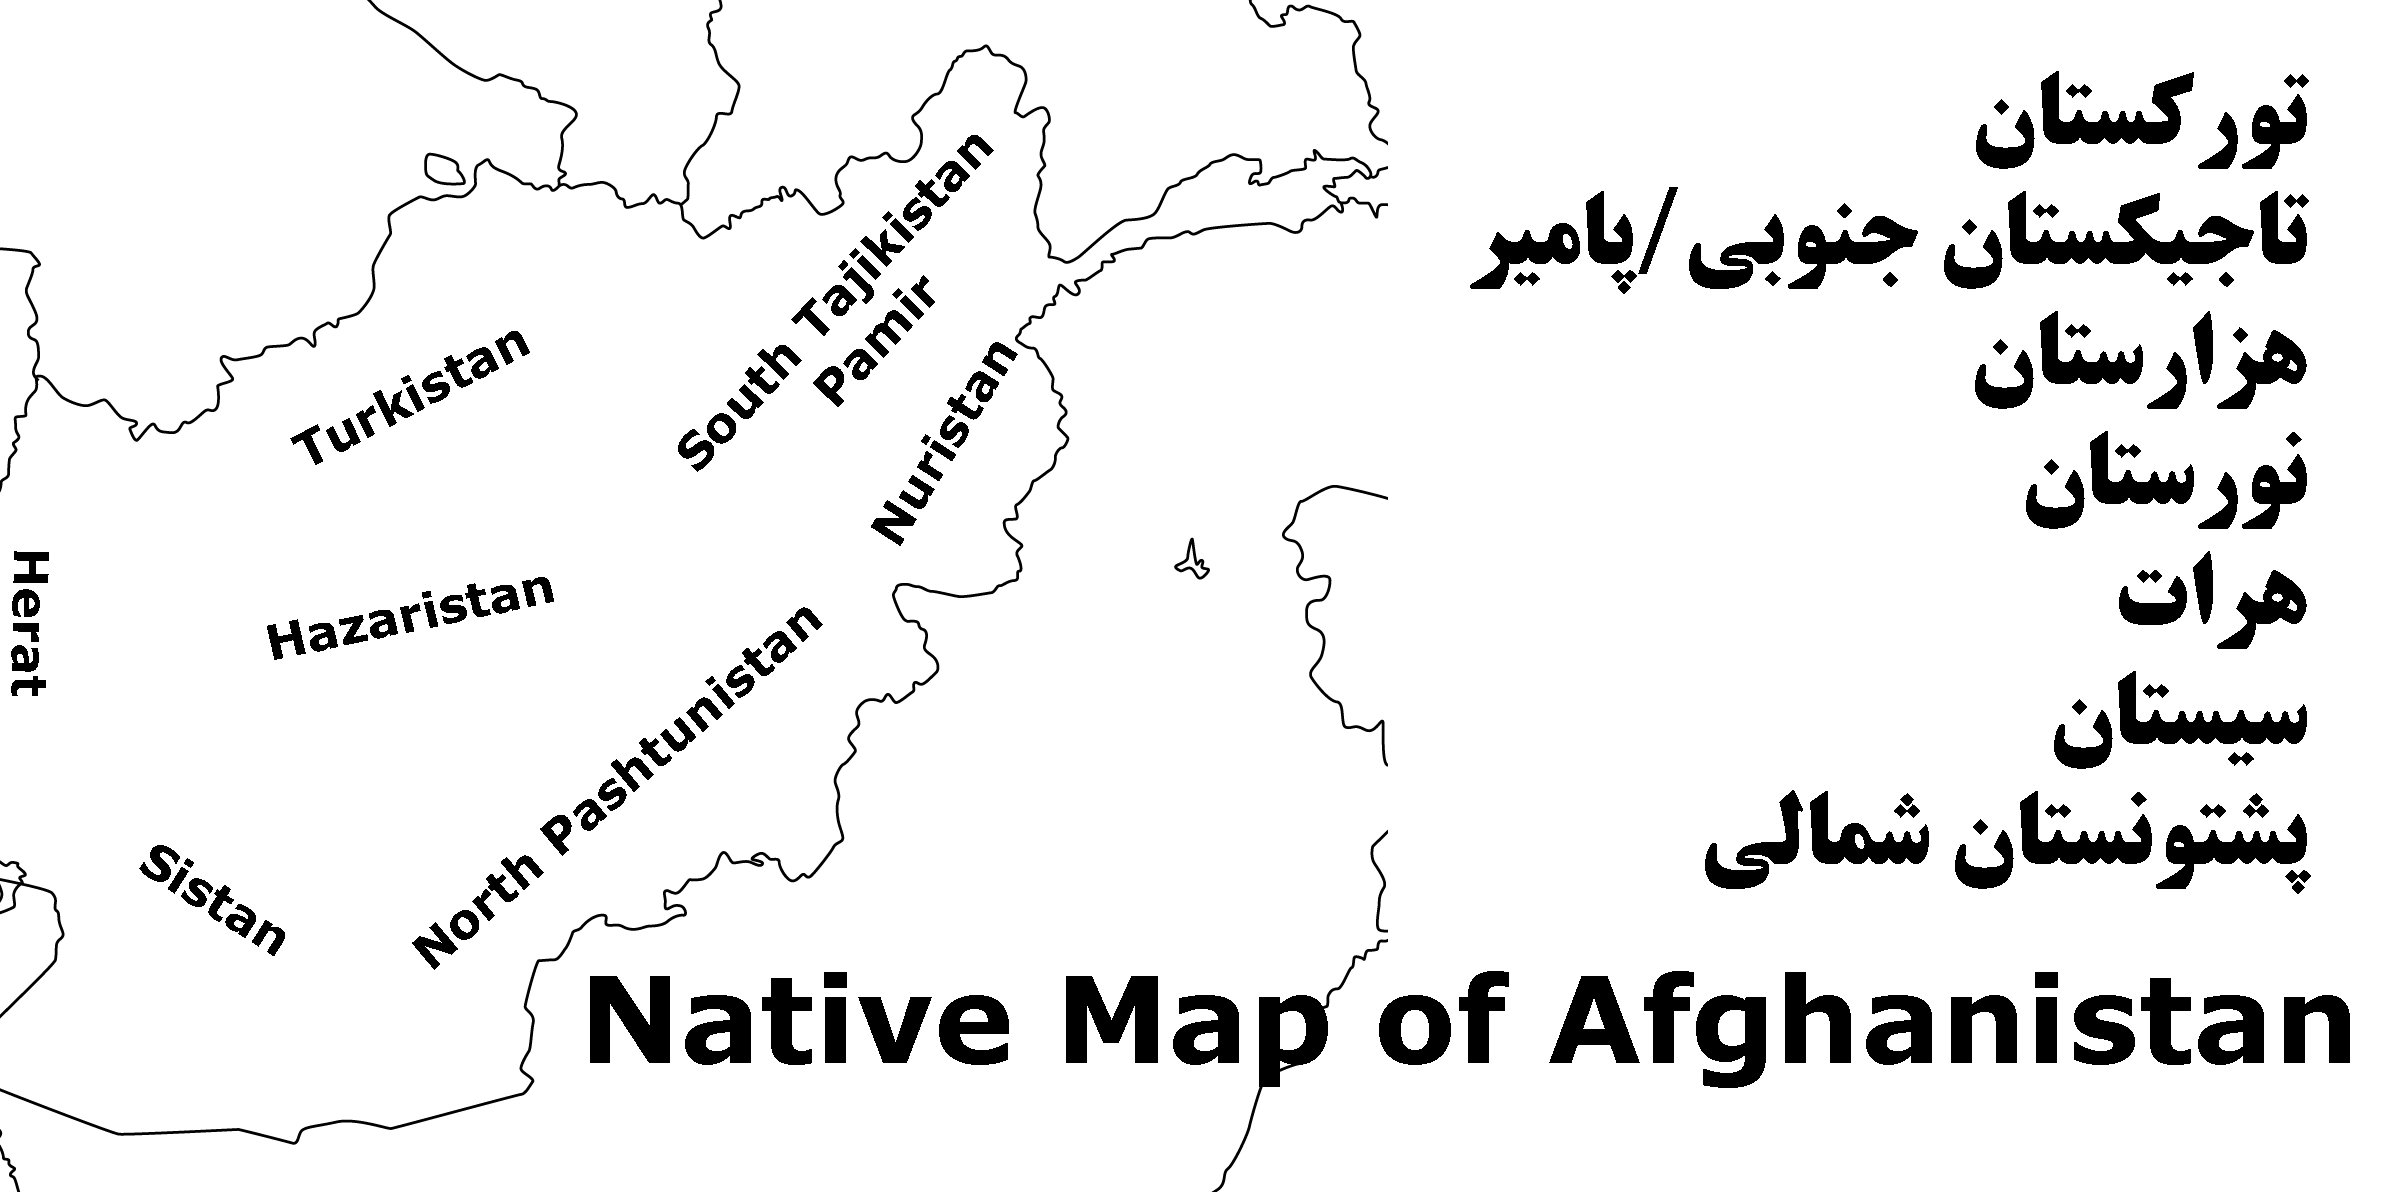 Federal Republic of Afghanistan, two suggested maps